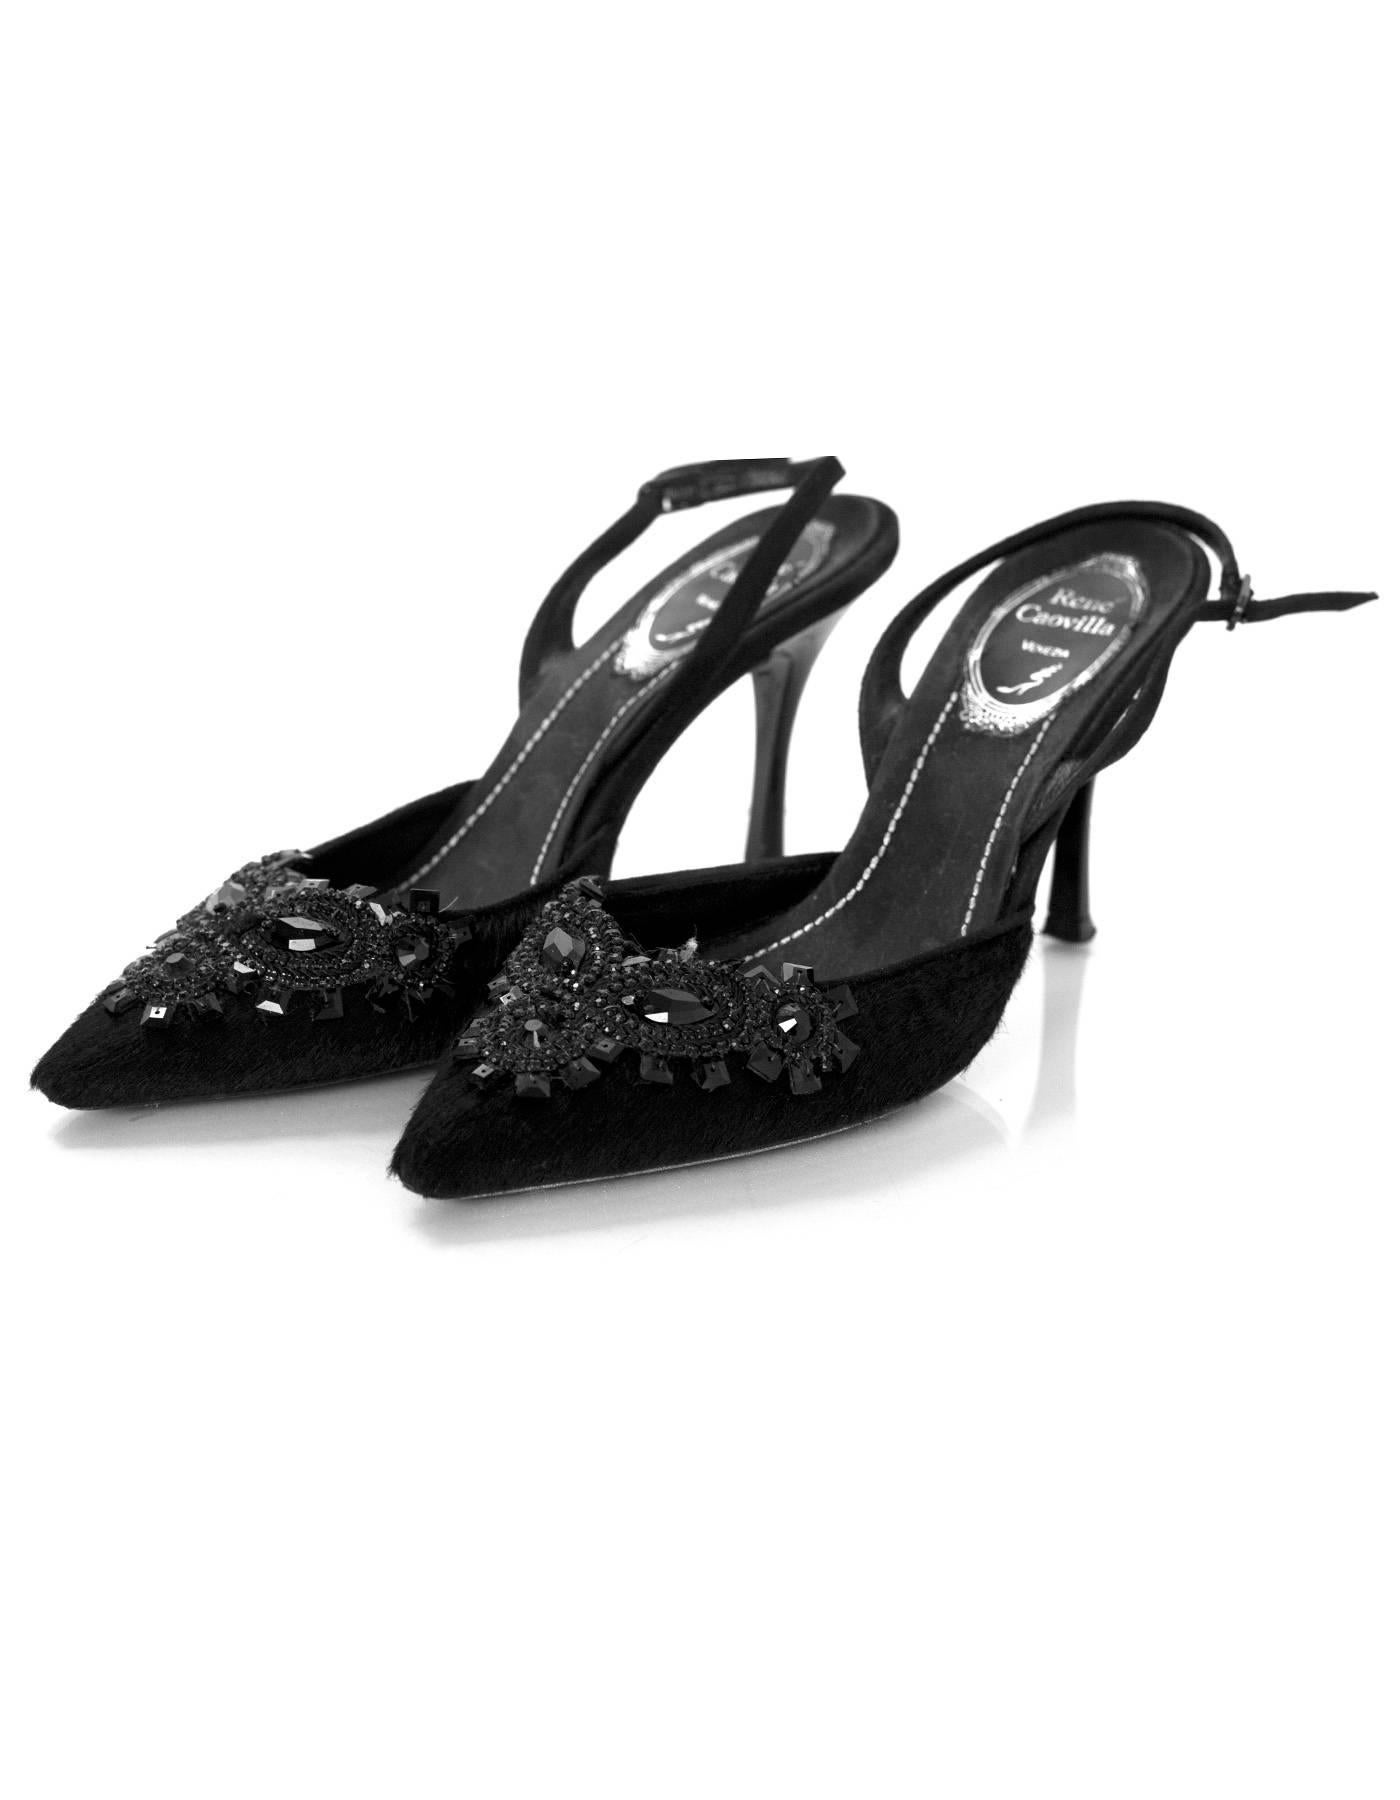 Rene Caovilla Black Calfskin Embellished Pumps Sz 35.5

Made In: Italy
Color: Black
Materials: Calfskin, beads
Closure/Opening: Slingback ankle strap
Sole Stamp: Made in Italy 35.5 Rene Caovilla
Overall Condition: Excellent pre-owned condition with